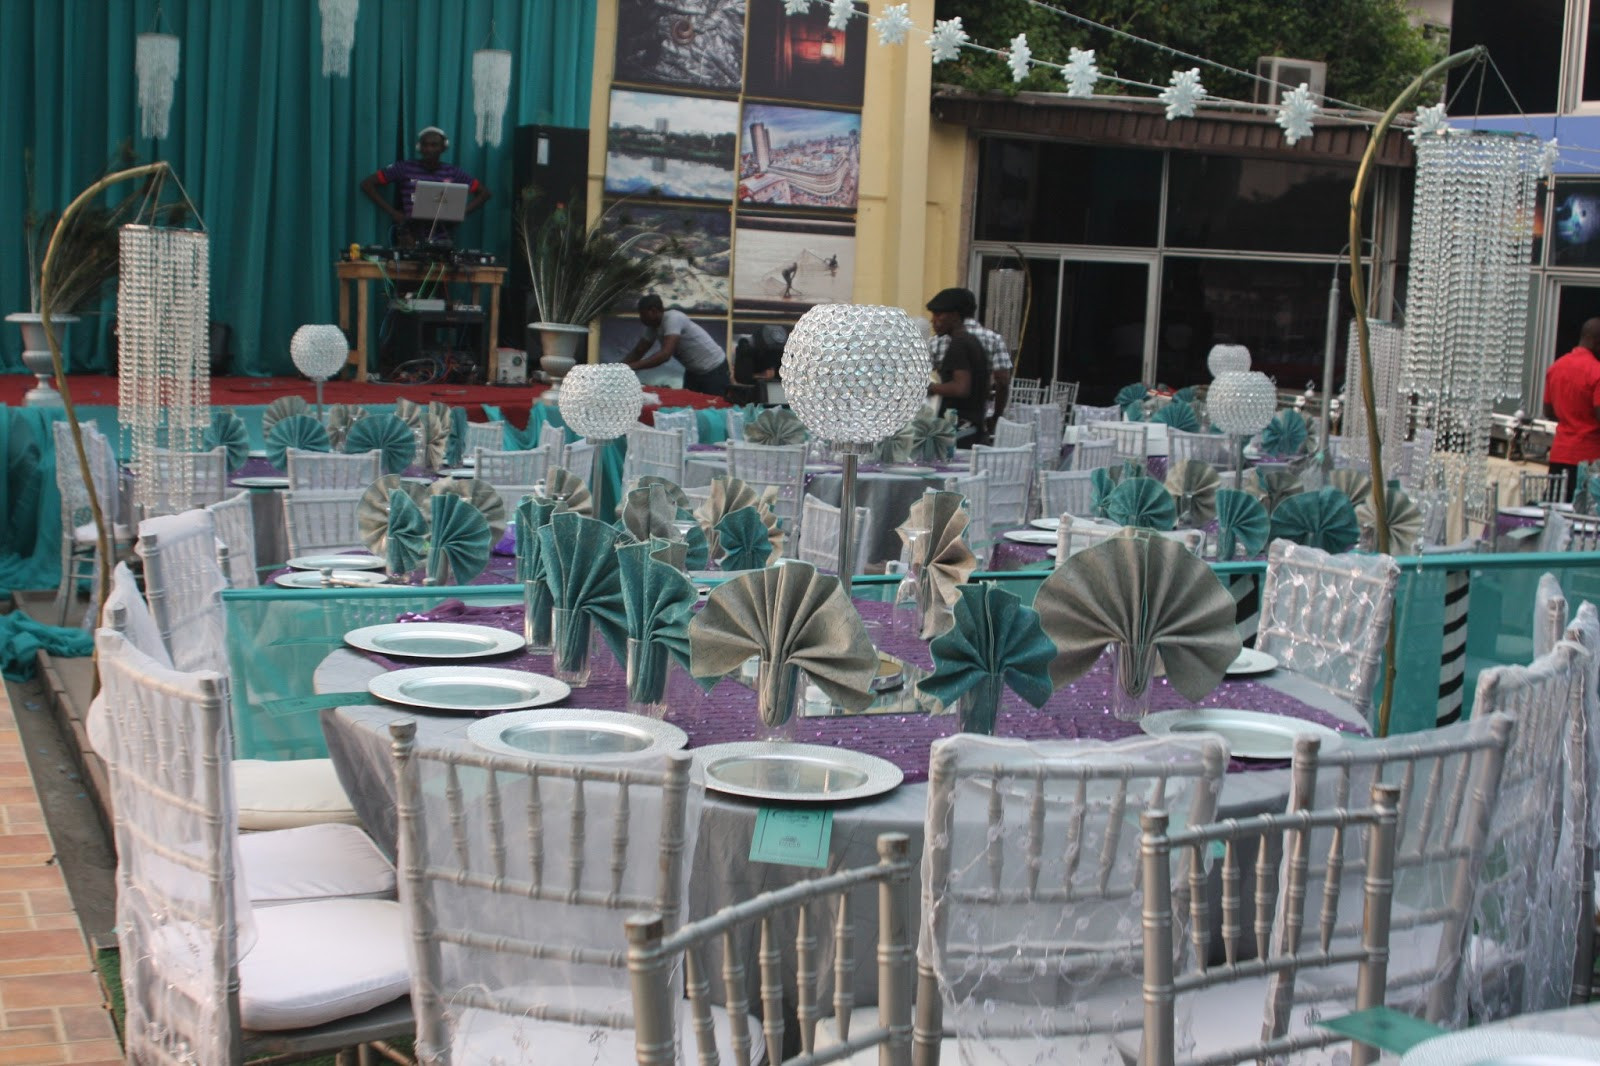 Teal And Purple Wedding Decorations
 AQUARIAN TOUCH EVENTS NG PURPLE TEAL& SILVER WEDDING DINNER